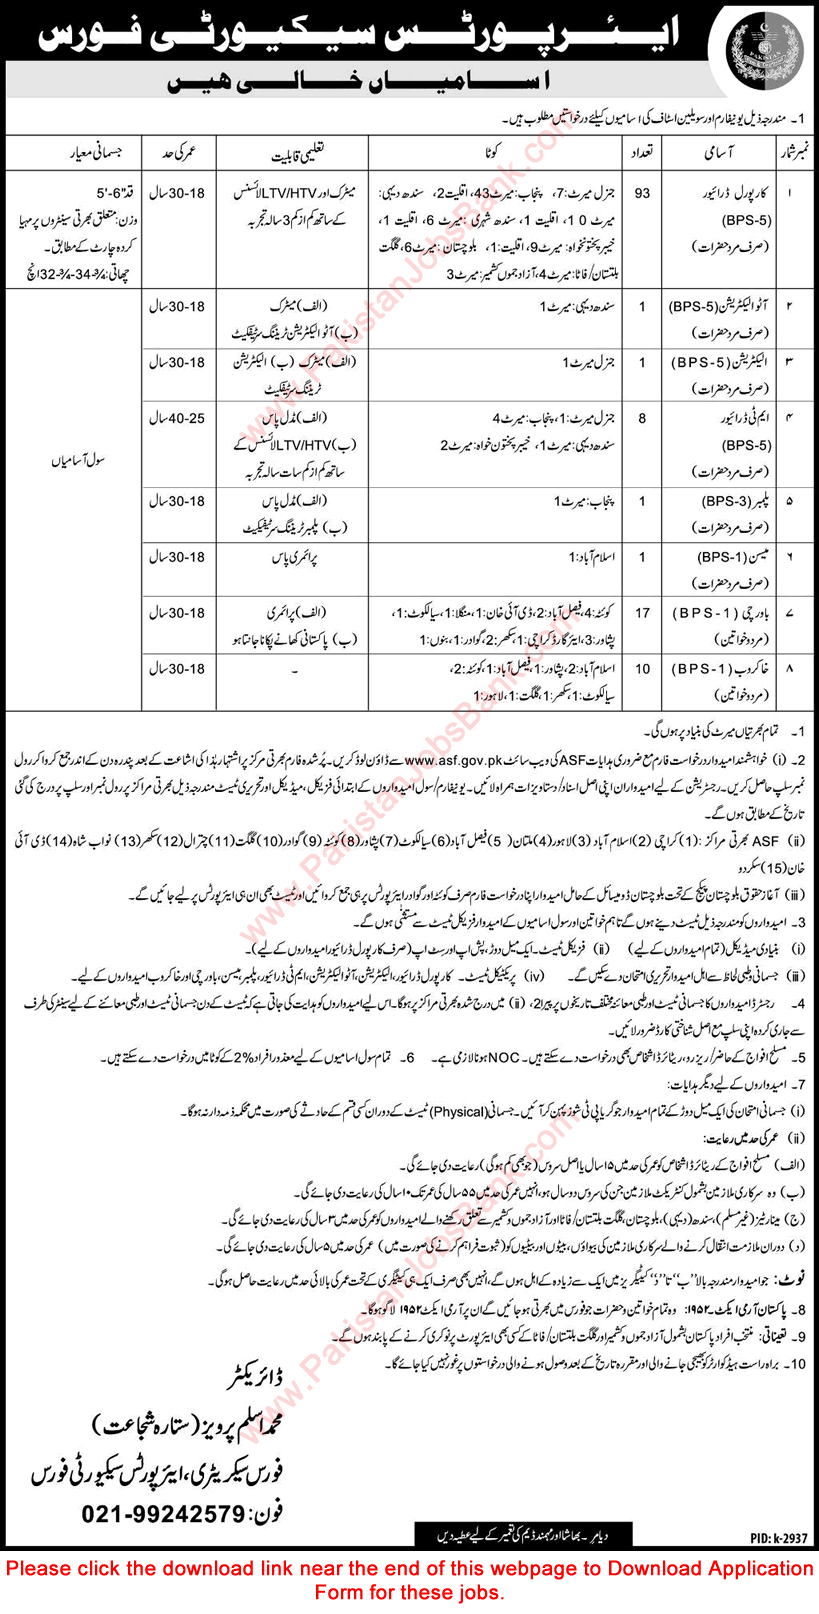 Airport Security Force Jobs 2019 February ASF Application Form Corporal Drivers & Others Latest / New